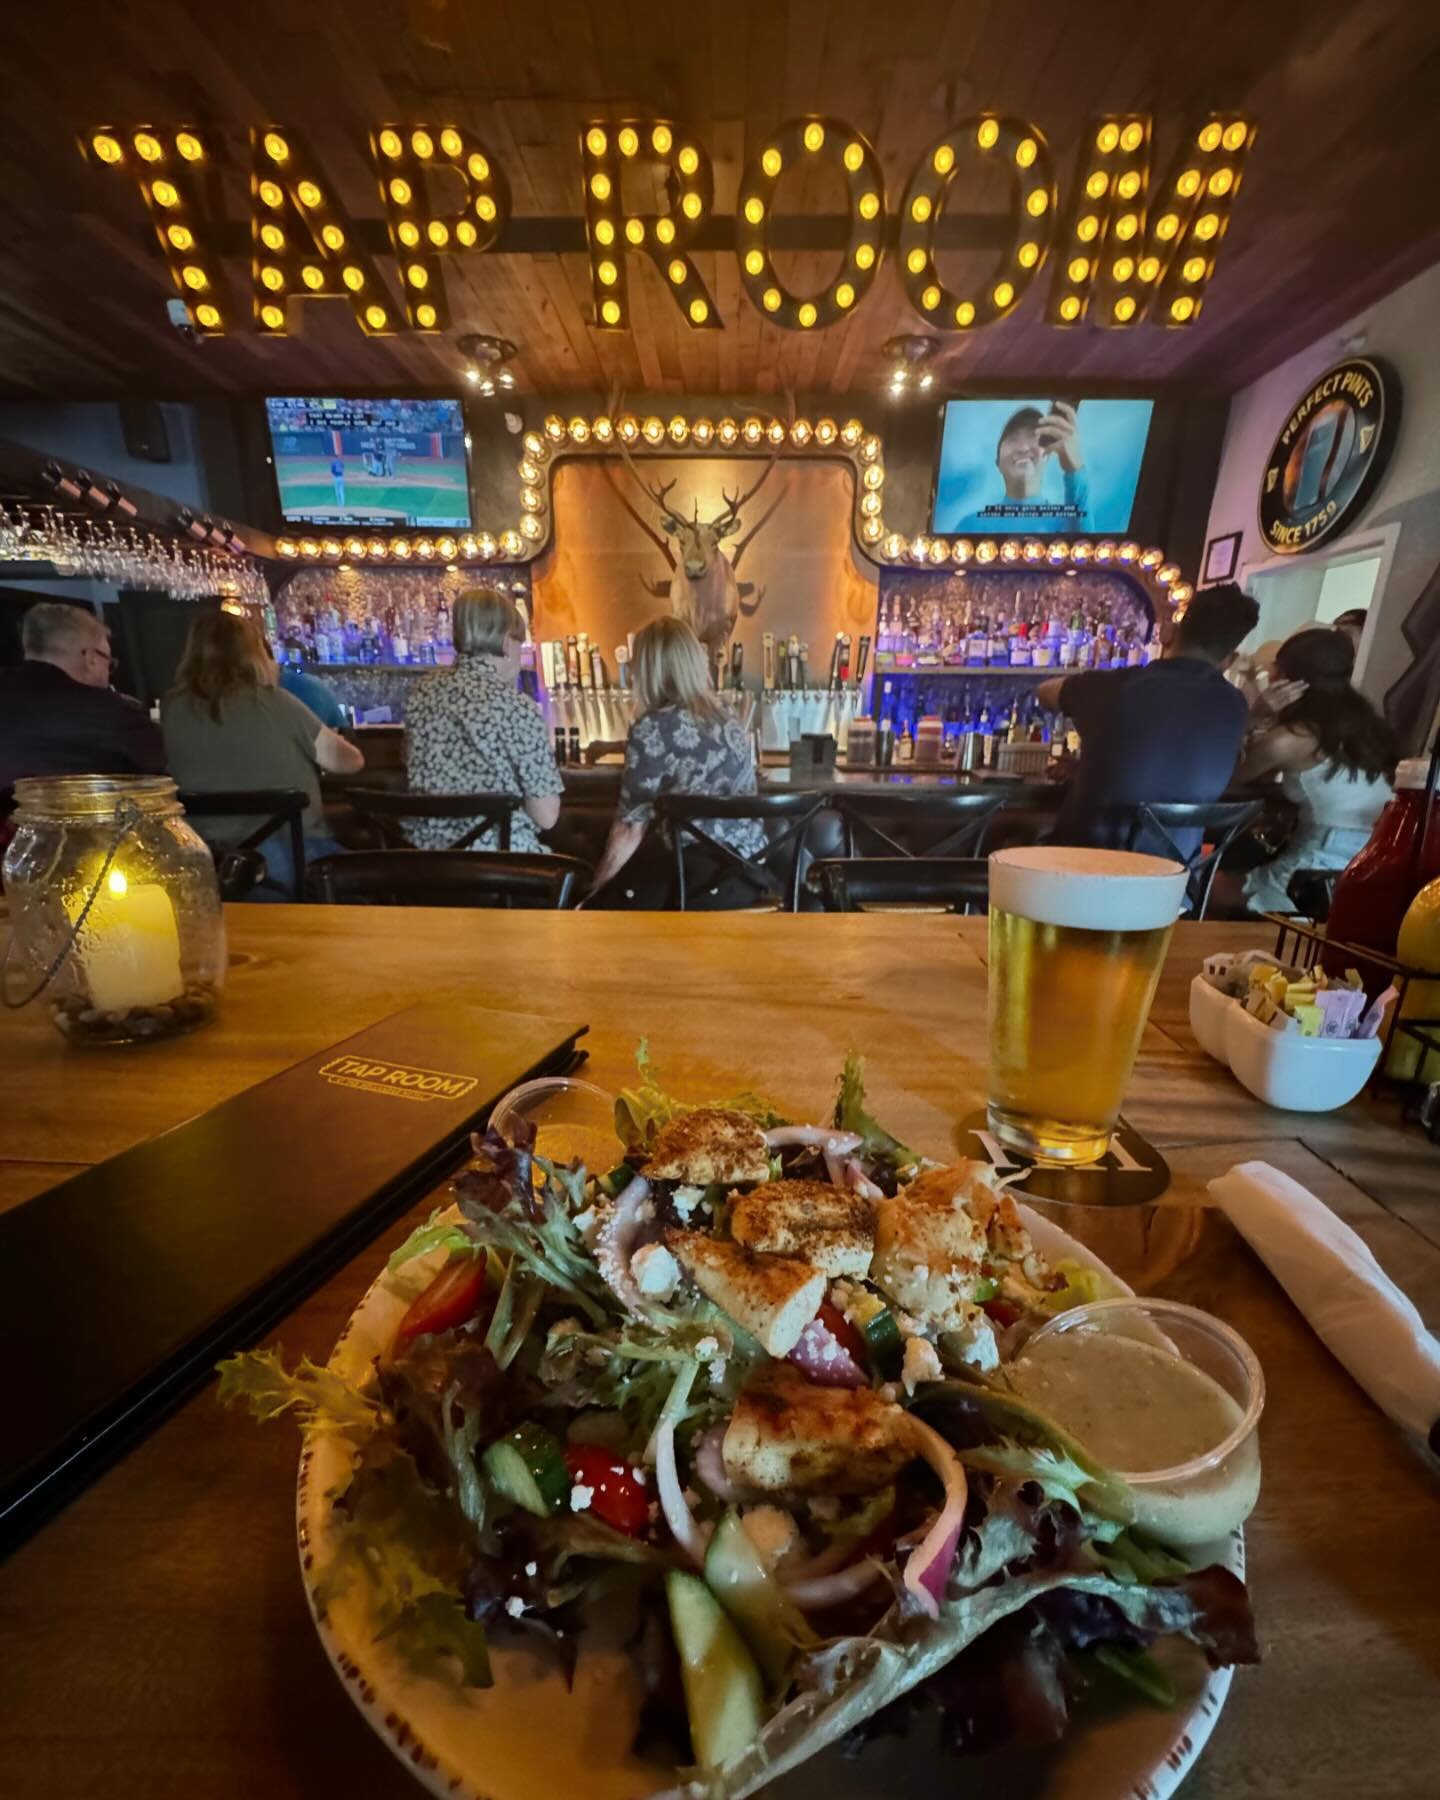 Stay cool 😎 ☀️ and join us inside the Tap Room for lunch or dinner today!  Our cripsy good Greek salad topped with your choice of blackened shrimp, chicken or salmon paired up with an ice cold Michelob Ultra will hit the spot! 🍺 1/2 OFF Craft Beers